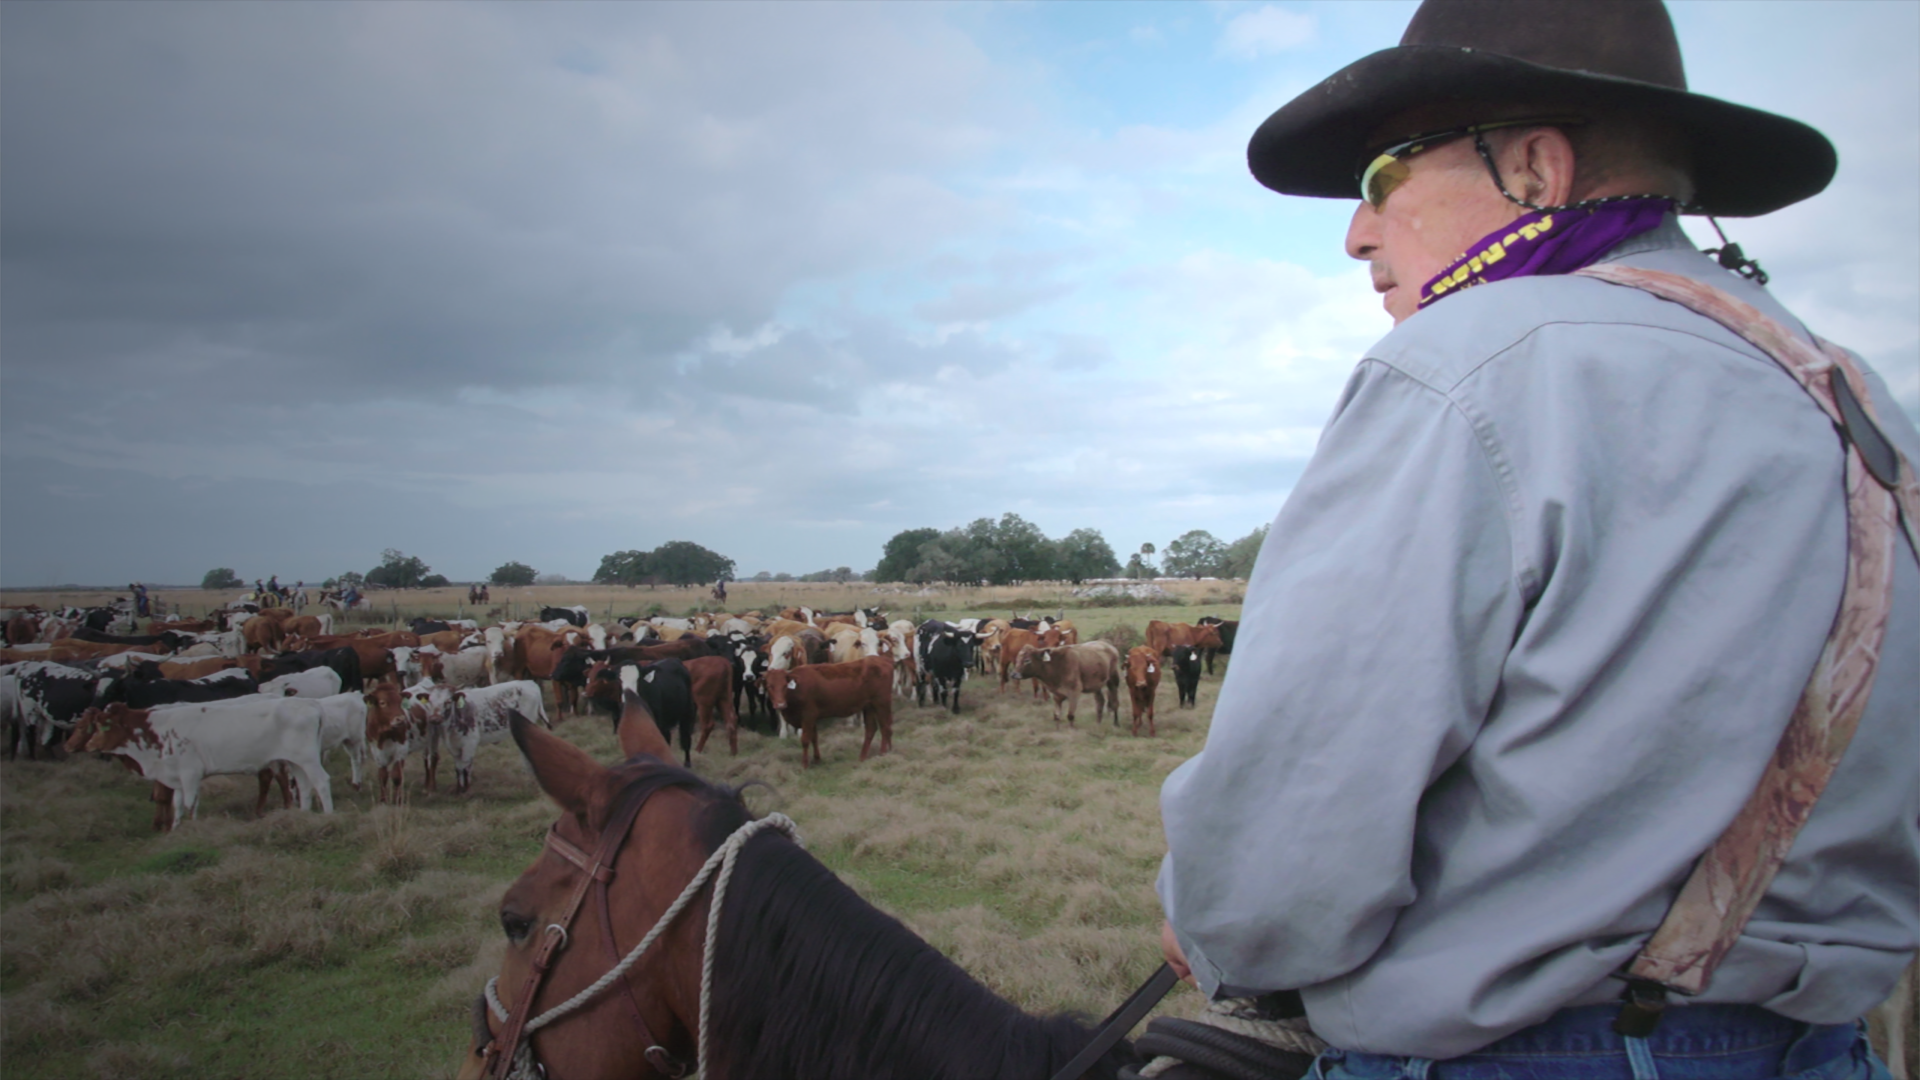 Have Camera, Will Ride!  The Great Florida Cattle Drive.